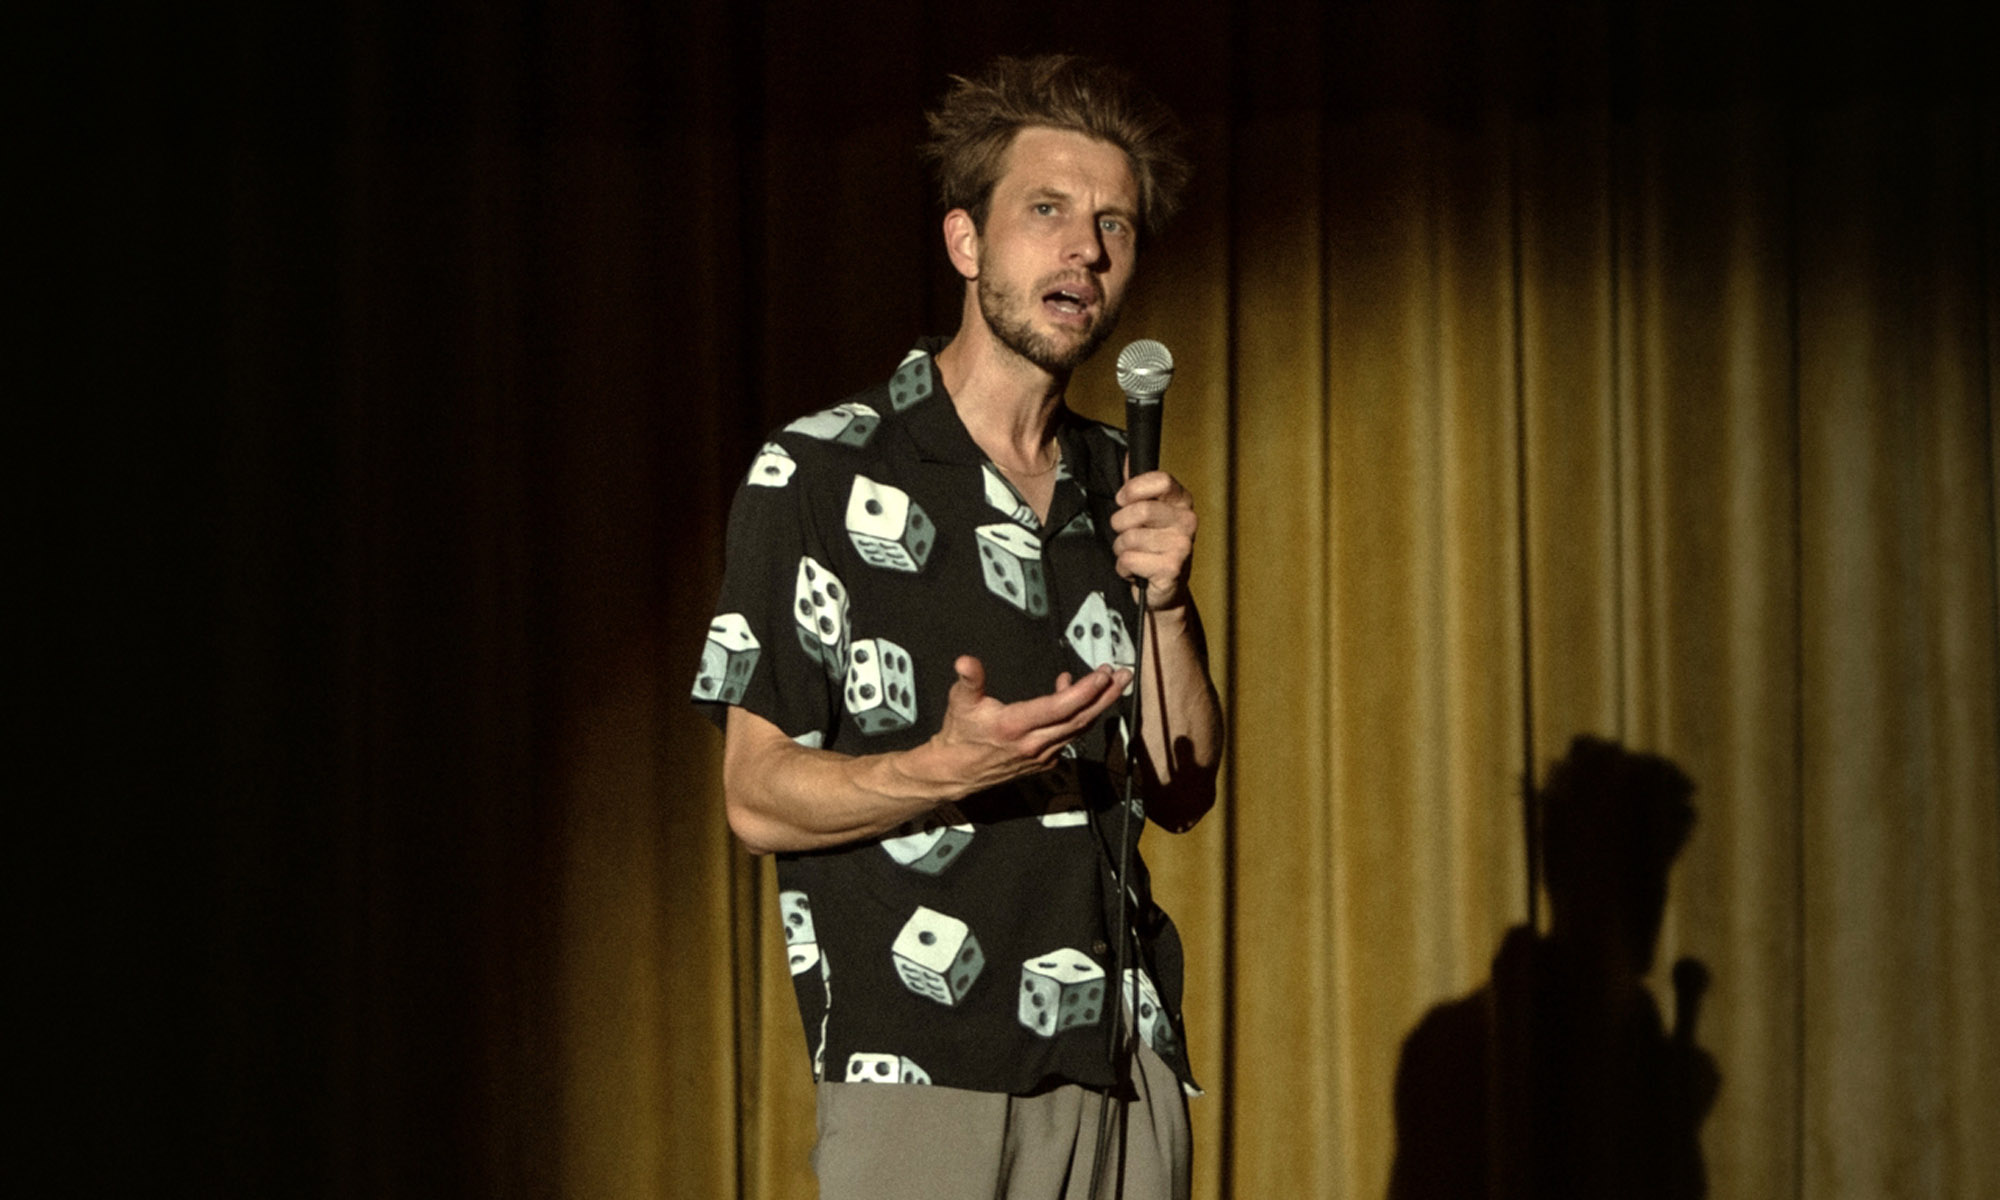 David (Anders Danielsen Lie) seen performing his stand-up set. There’s a spotlight on him, highlighting David and creating shadows around him along with a shadow of himself behind him. He’s in the middle of talking, one hand holding a microphone and the other gesticulating. He is wearing a black buttoned shirt with short sleeves and a printed pattern of white dices with black dots on them. 